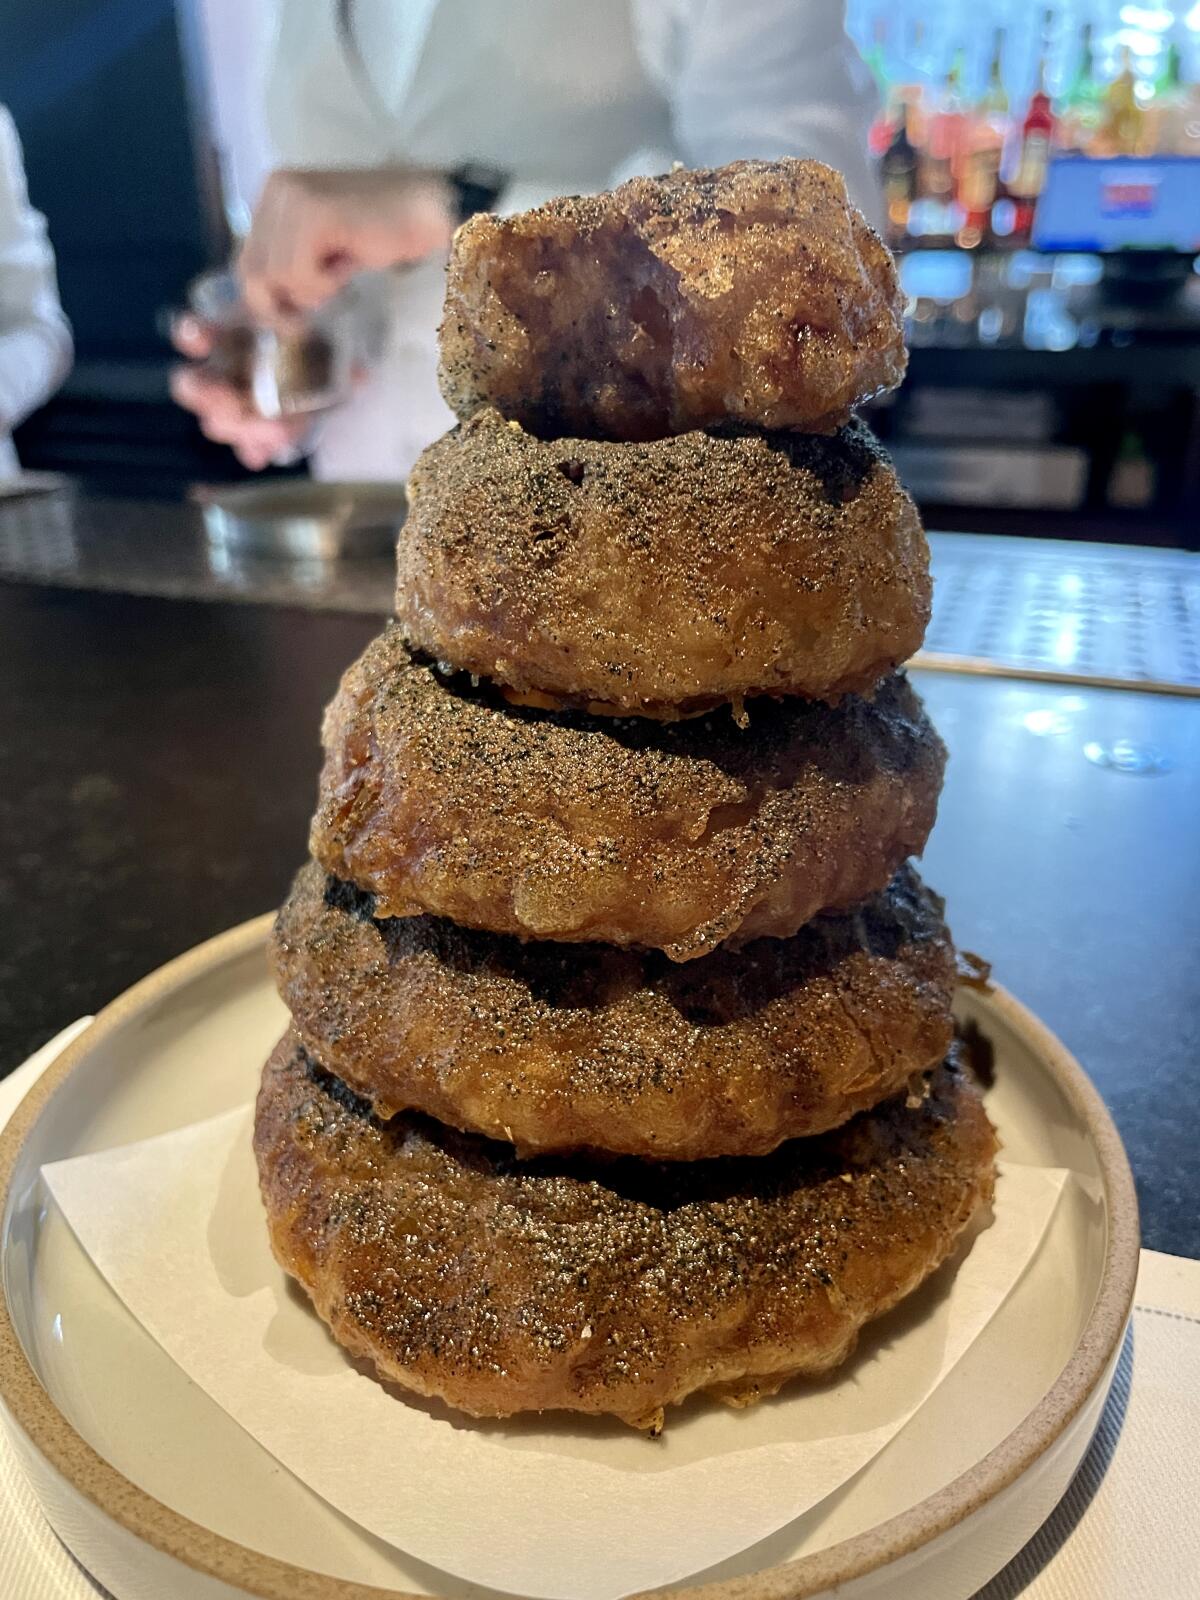 A thick stack of onion rings on a plate.